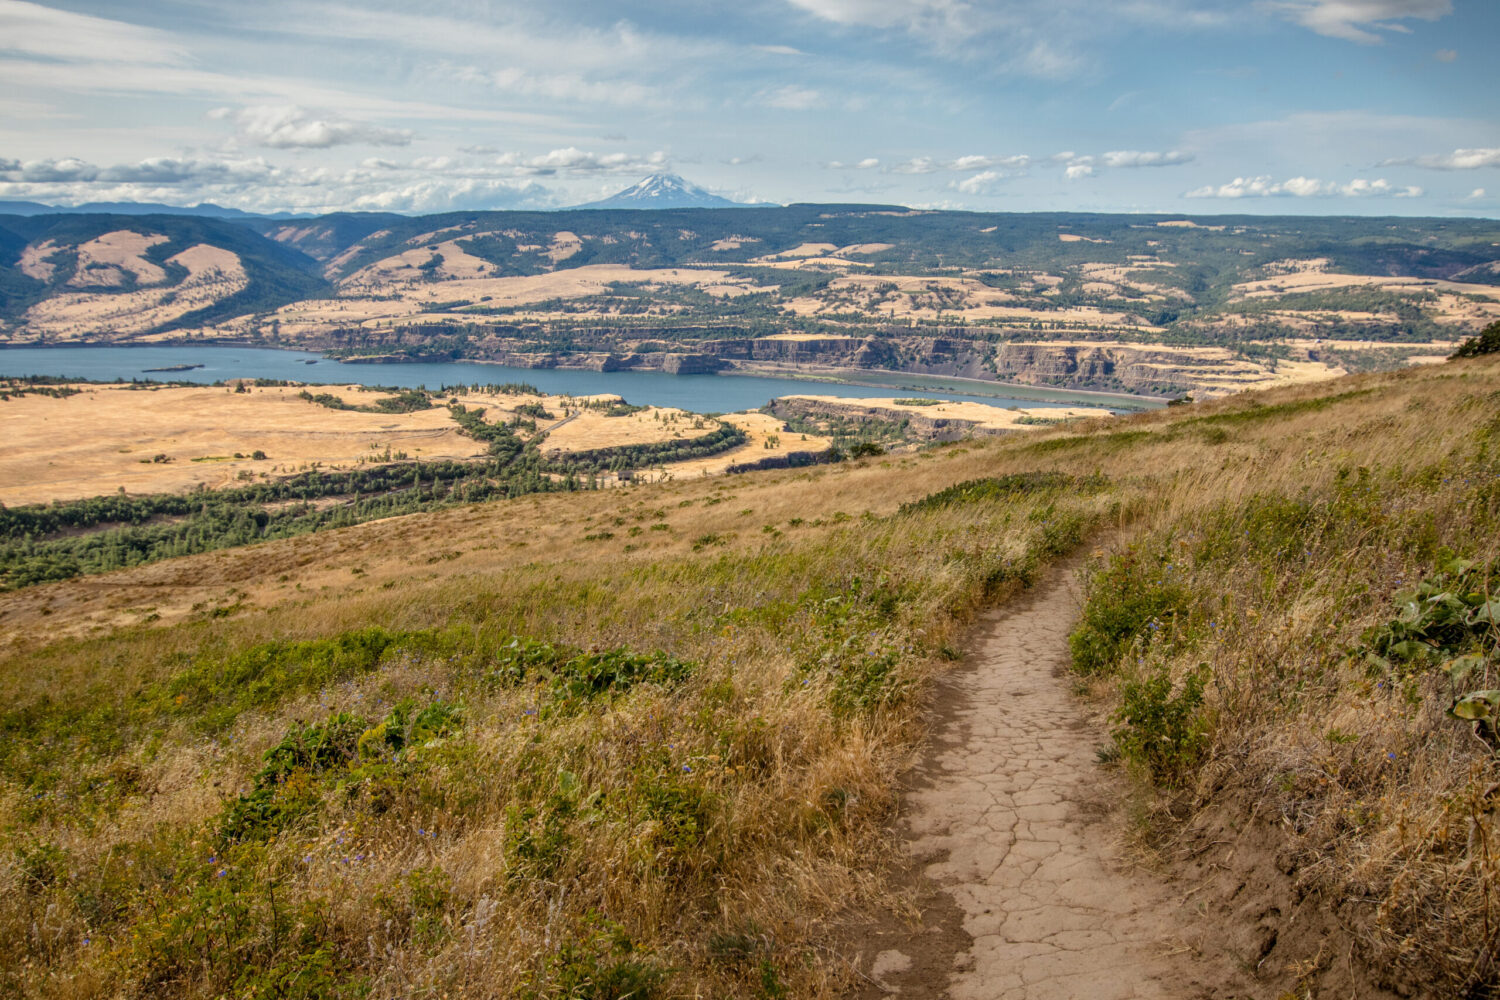 Rowena Crest viewpoint in Oregon